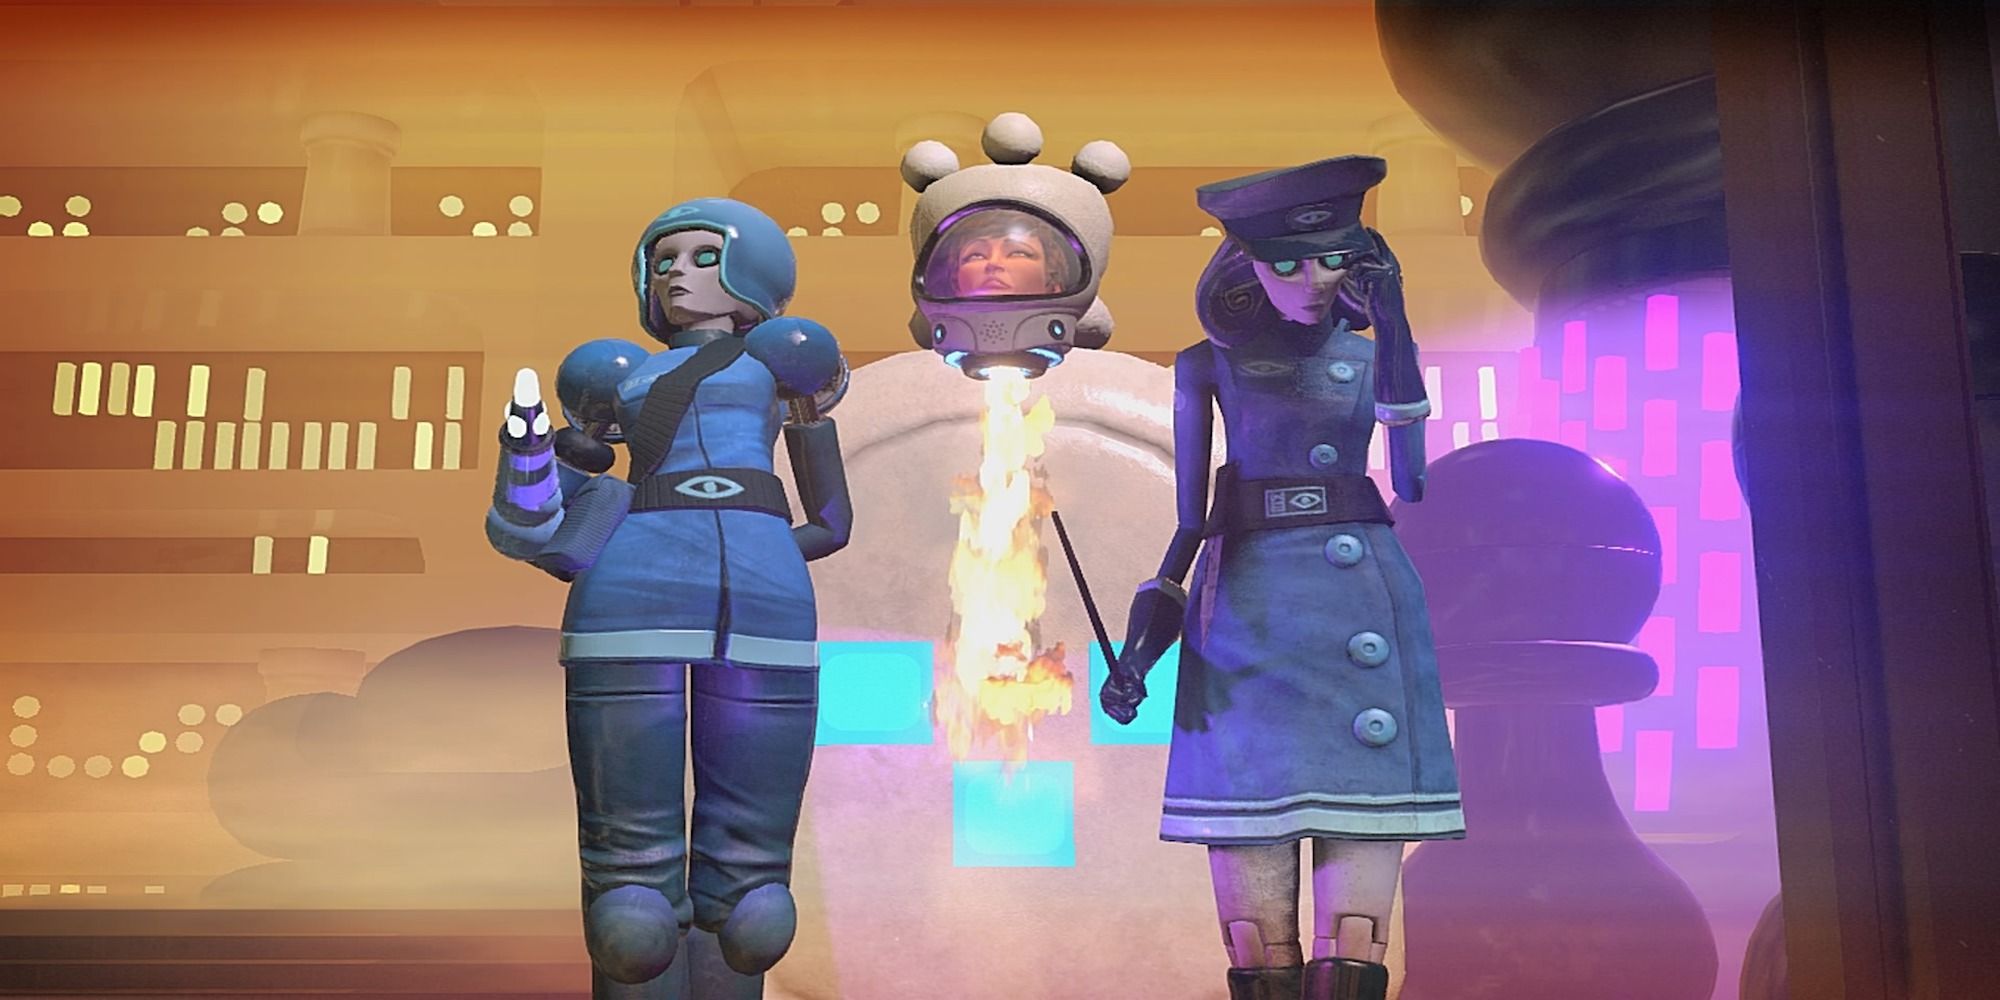 A cutscene featuring characters from Headlander